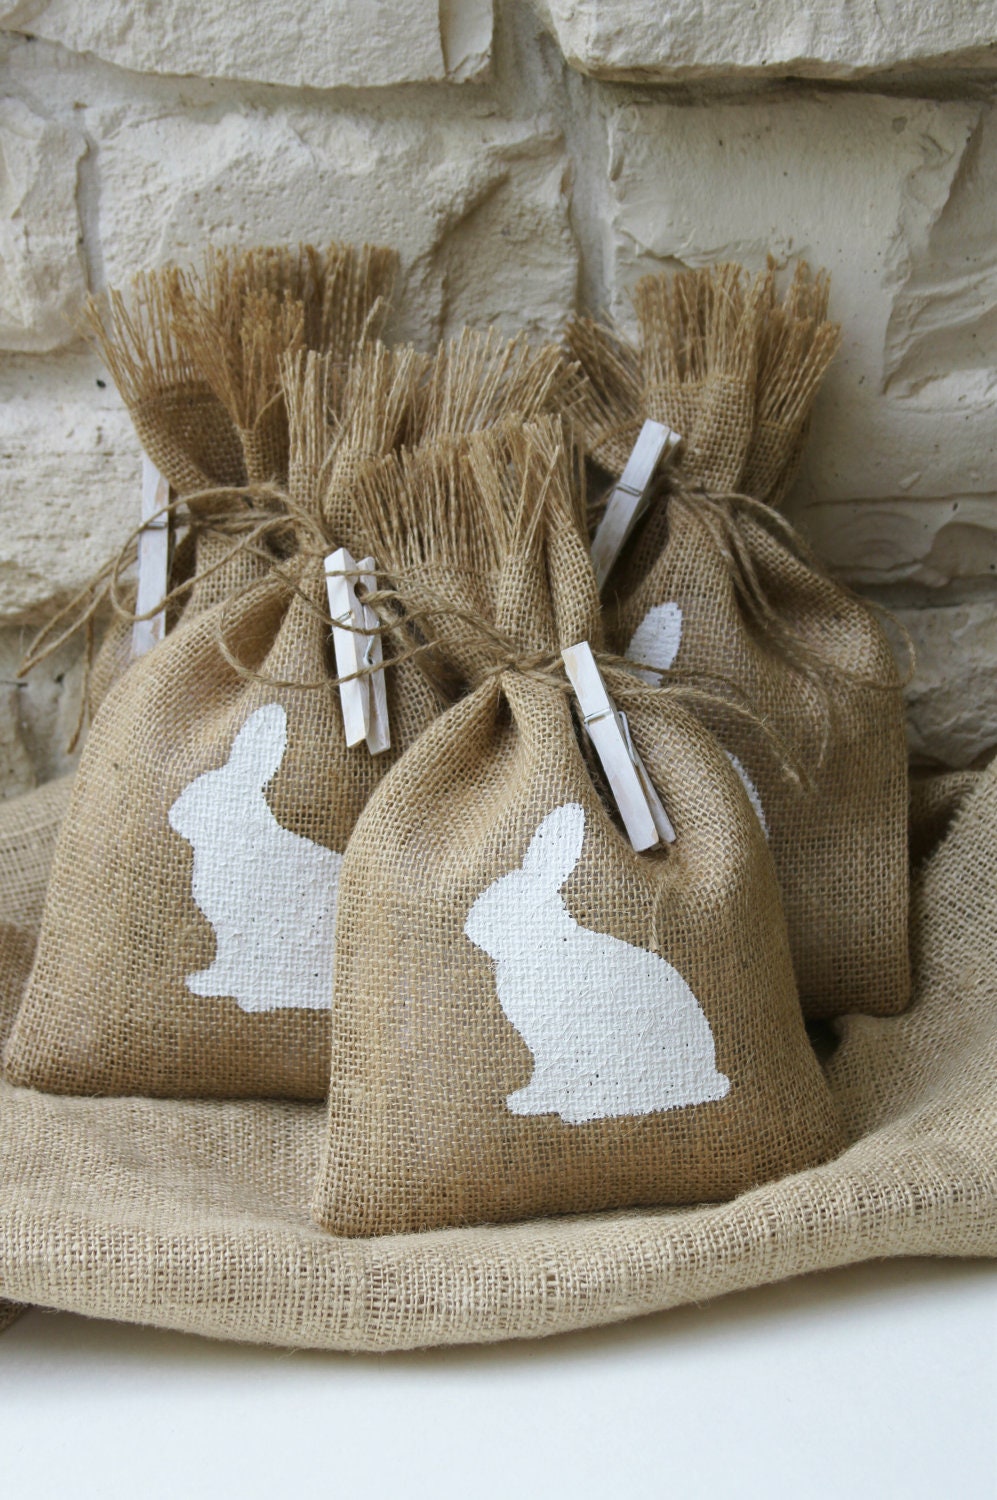 Burlap Gift Bags or Treat Bags, Easter, Baby Shower, Birthday Party, Shabby Chic Gift Wrapping, Set of Four.